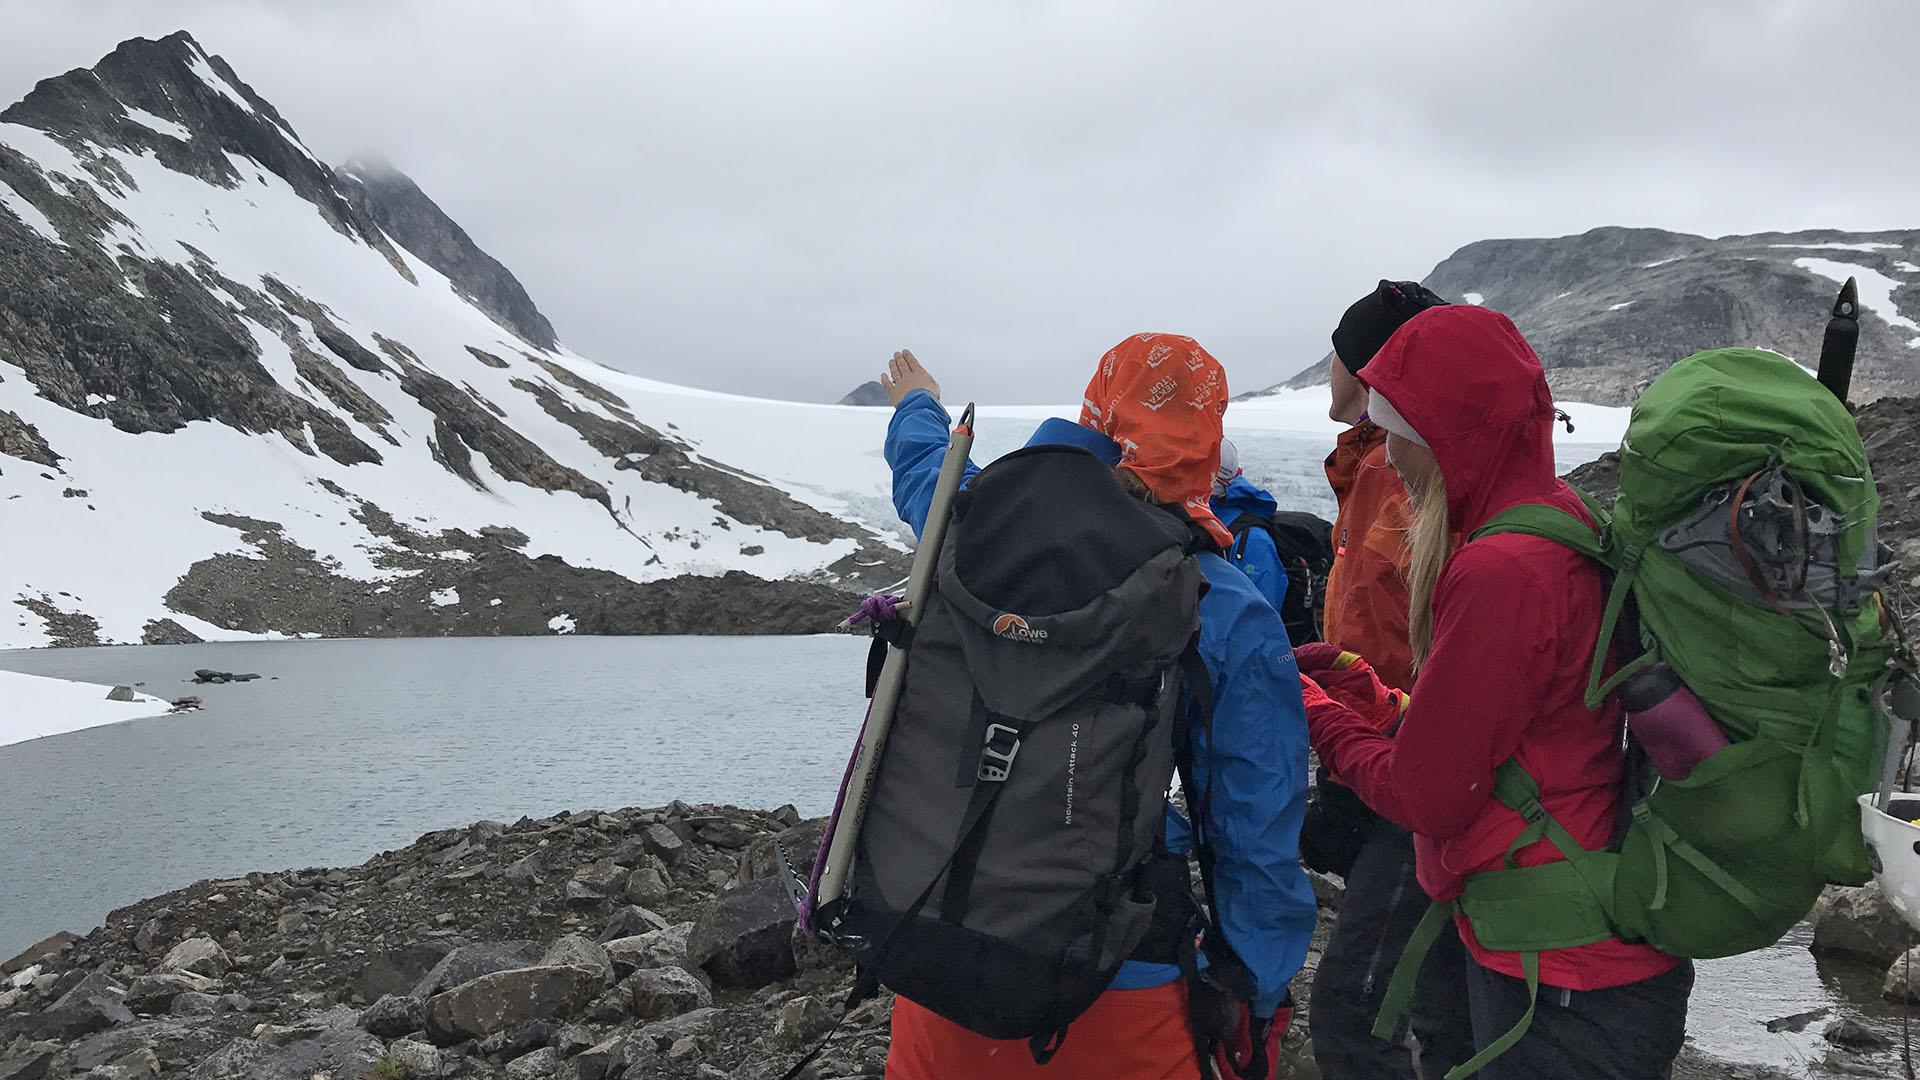 Mountain hikers discuss the route. One points towards a glacier and a high, pointed peak betond a lake.